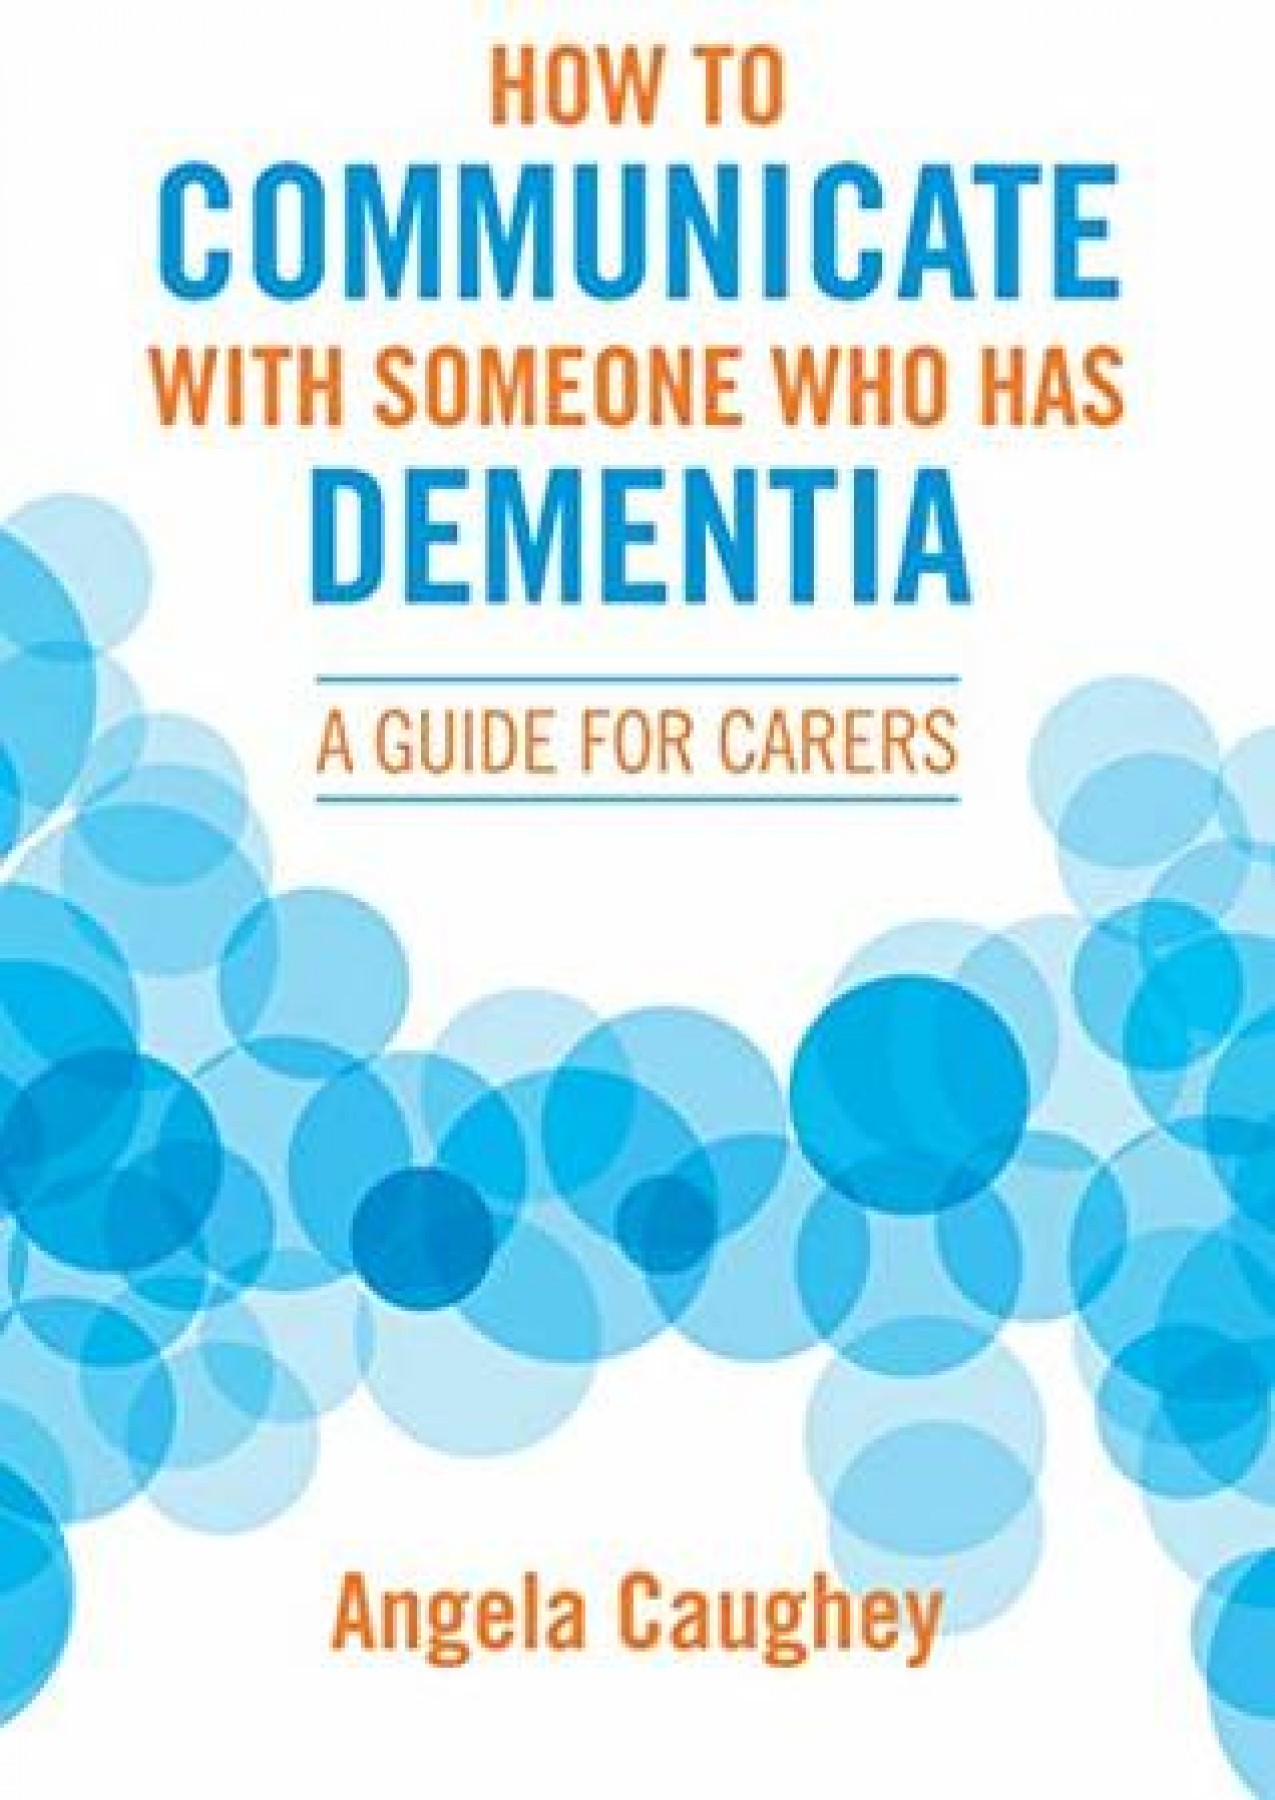 How to communicate with someone who has Dementia: A guide for carers